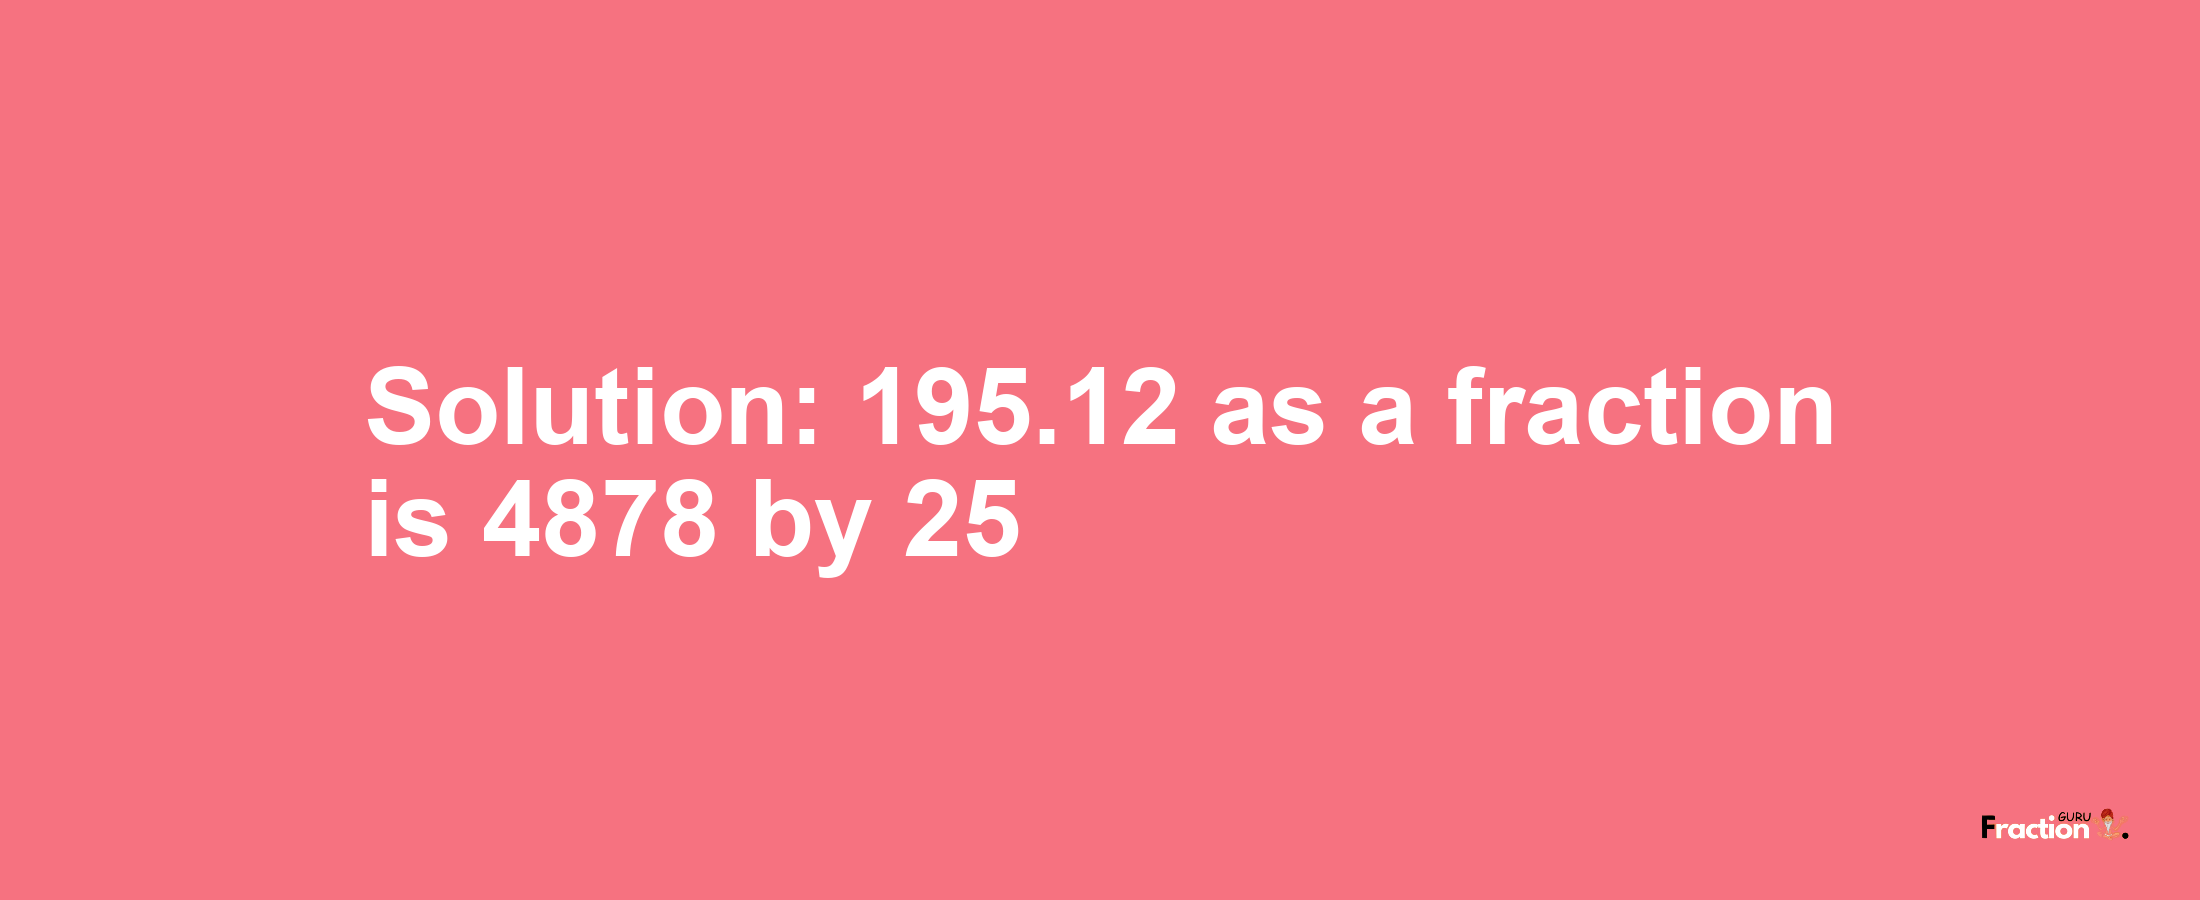 Solution:195.12 as a fraction is 4878/25